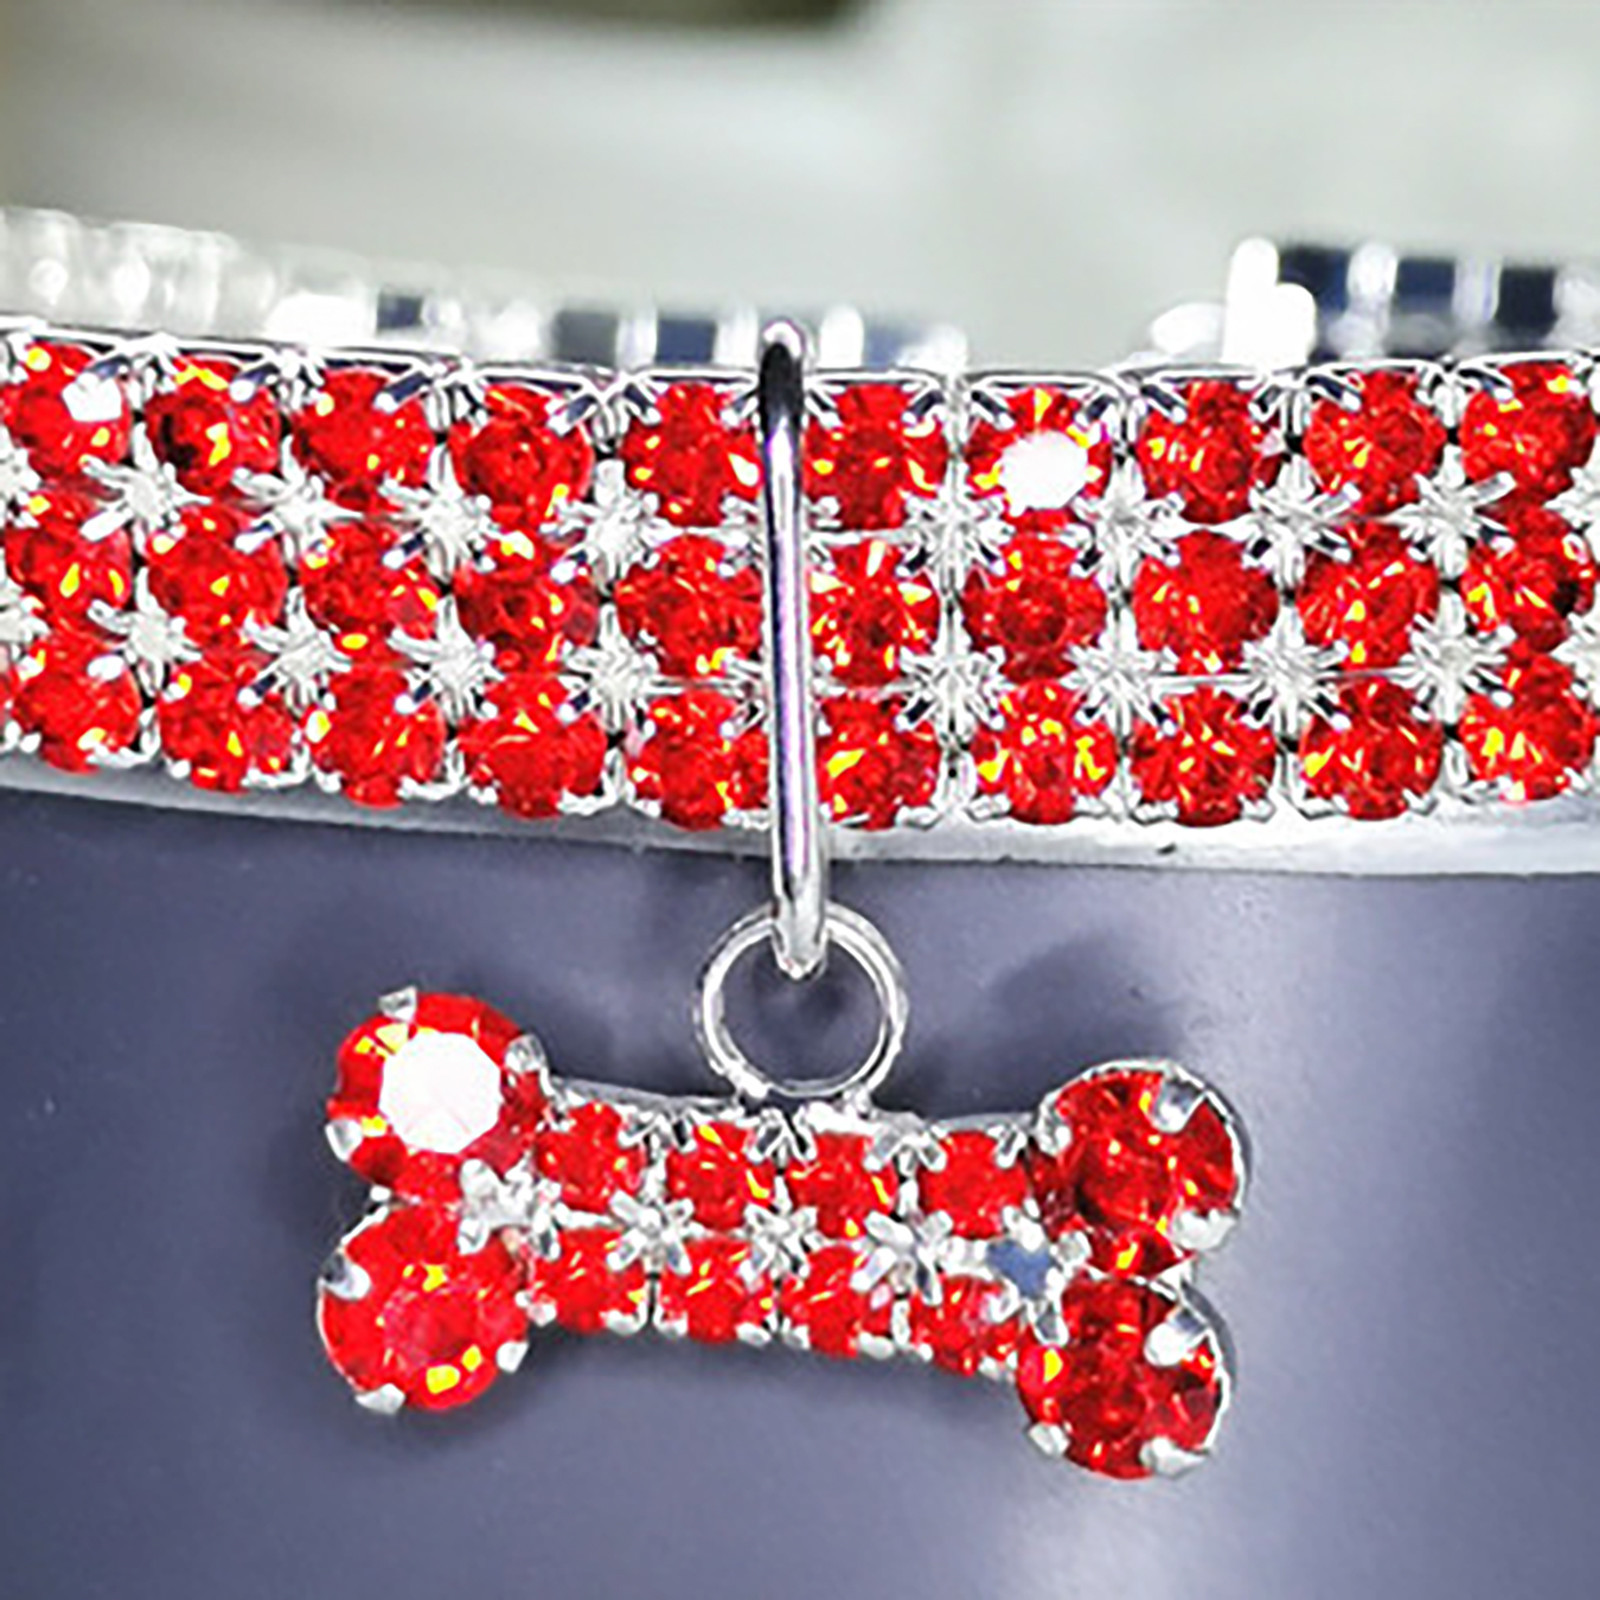 J Necklace for Boys Cute Mini Pet Dog Bling Rhinestone Chocker Collars Fancy Dog Necklace Ashes Necklace - image 5 of 7